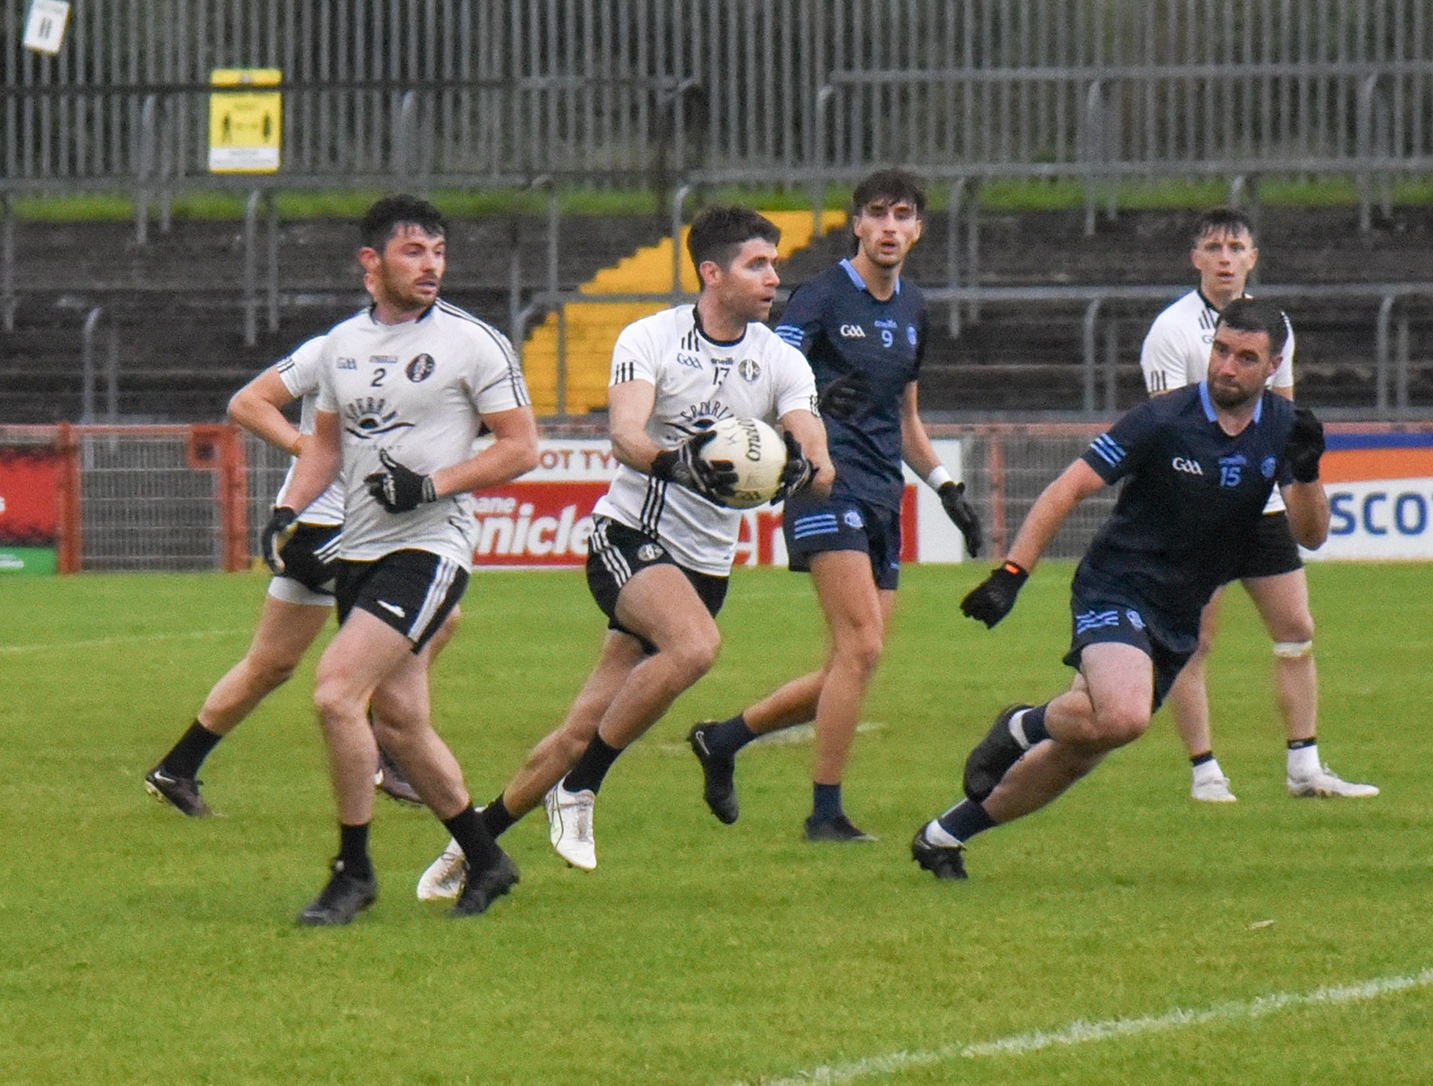 Derby stalemate at Healy Park